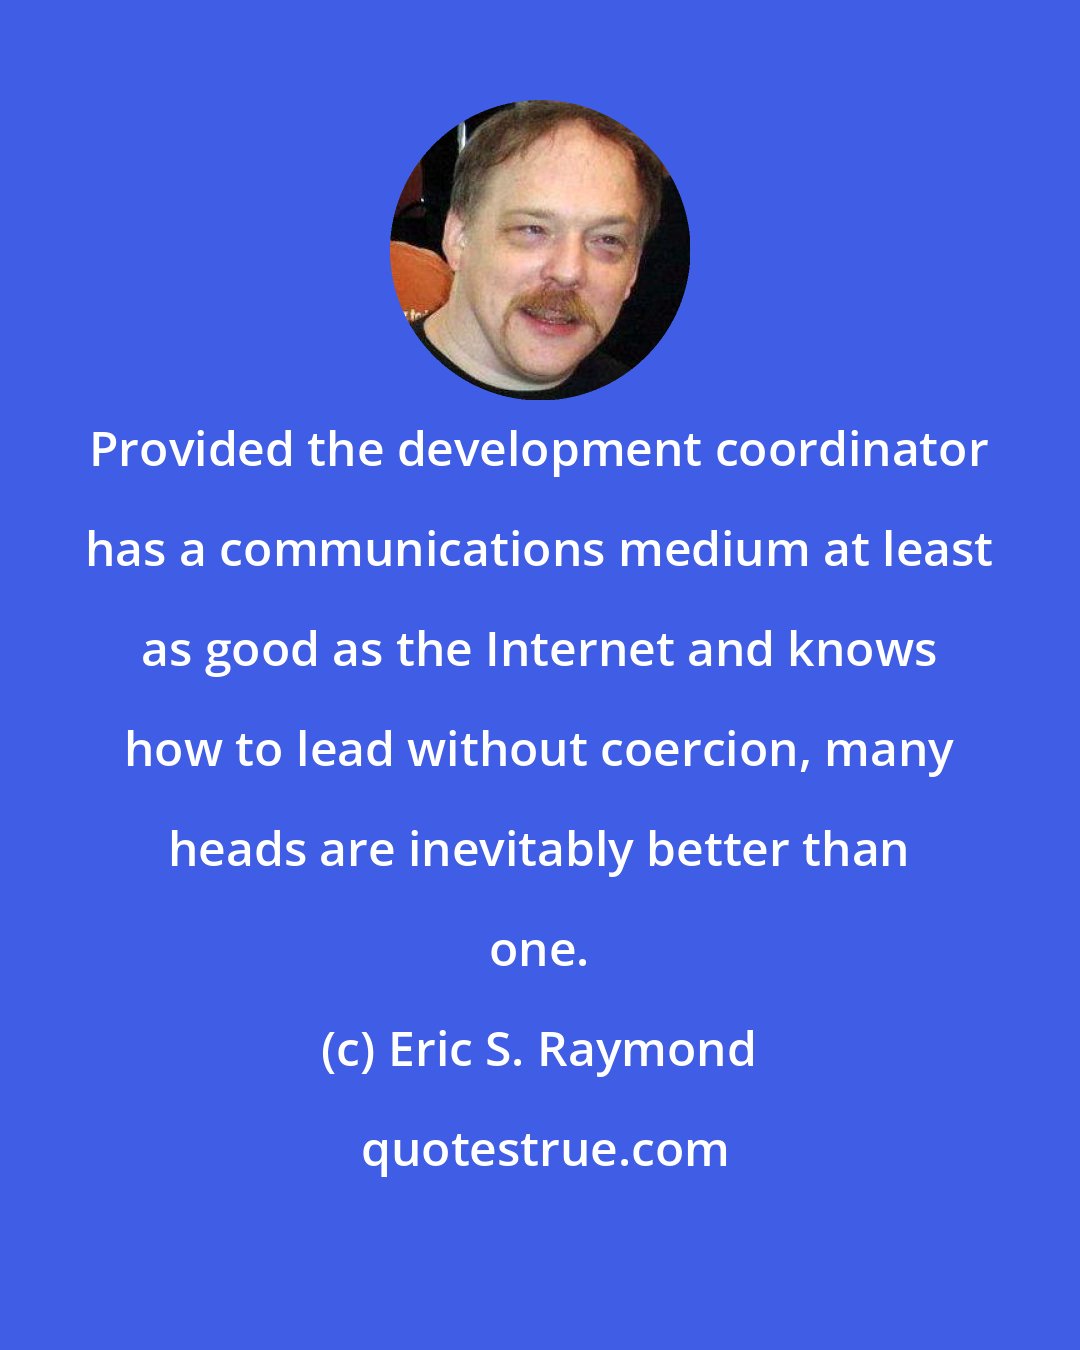 Eric S. Raymond: Provided the development coordinator has a communications medium at least as good as the Internet and knows how to lead without coercion, many heads are inevitably better than one.